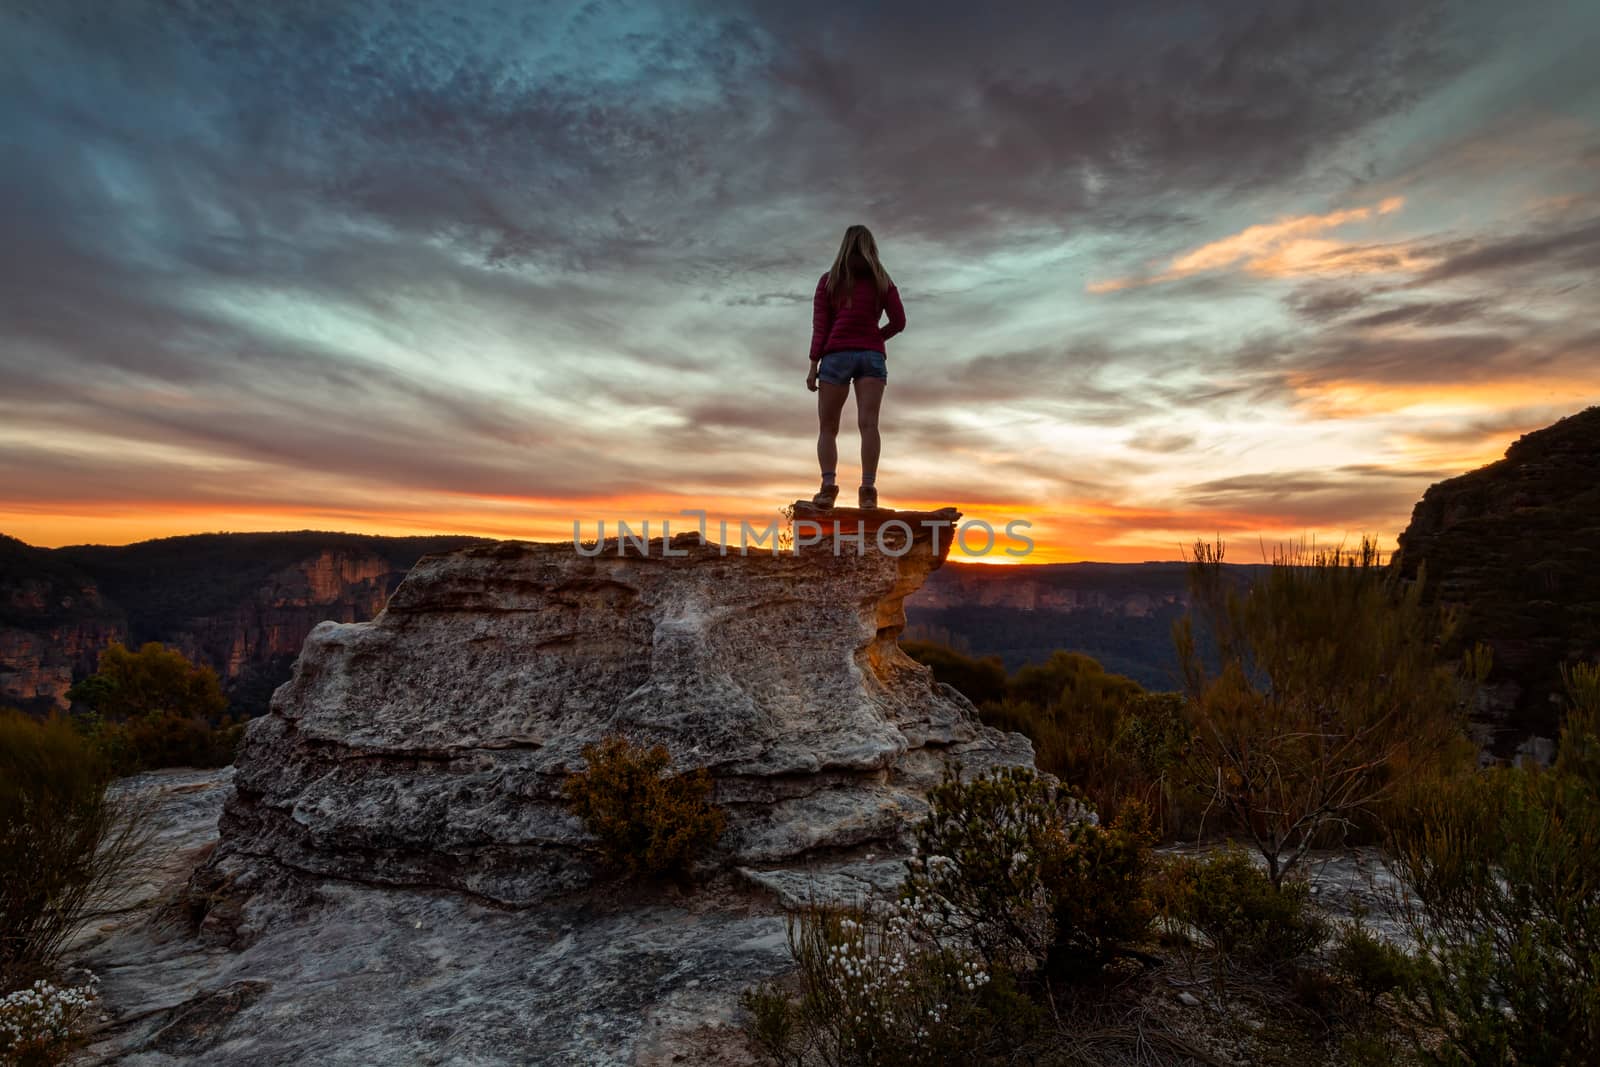 Female hiker stands on mountain peak rocky outcrop along the cliifs of Blue Mountains, taking in spectacular views as the sun sets.